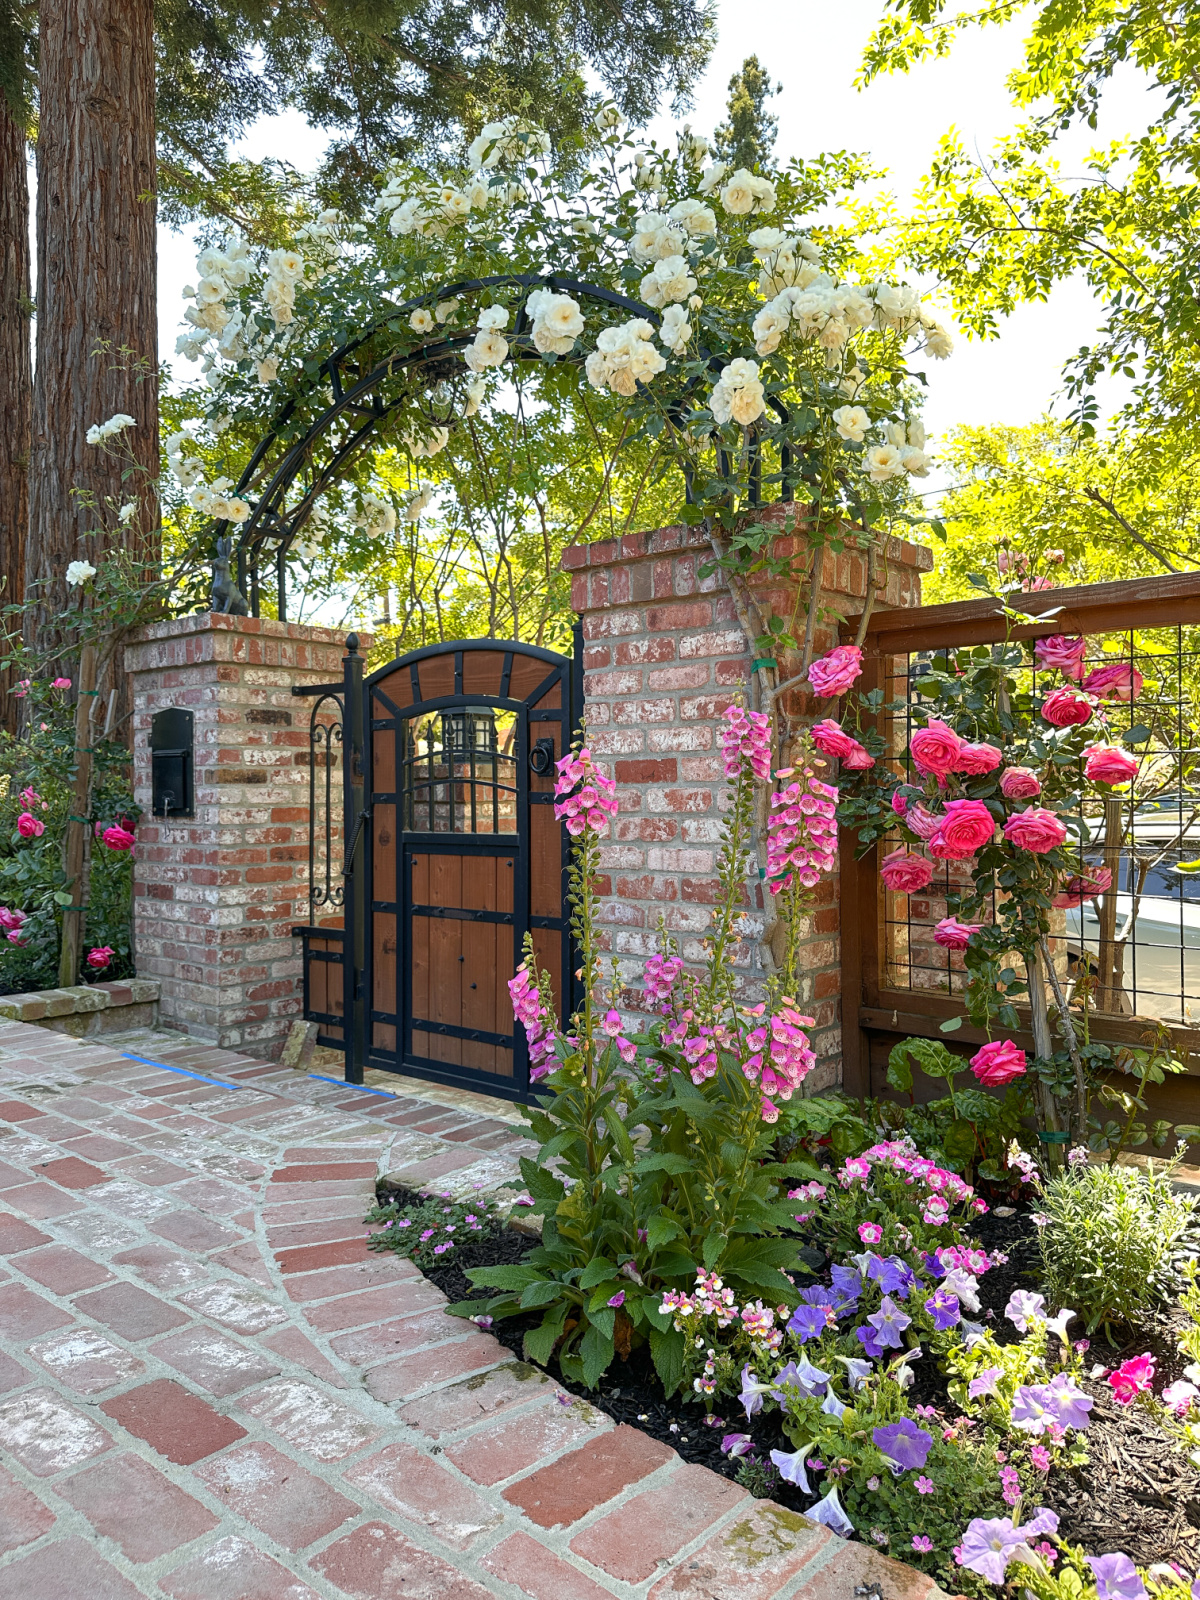 Garden gate covered by roses and other colorful flowers.